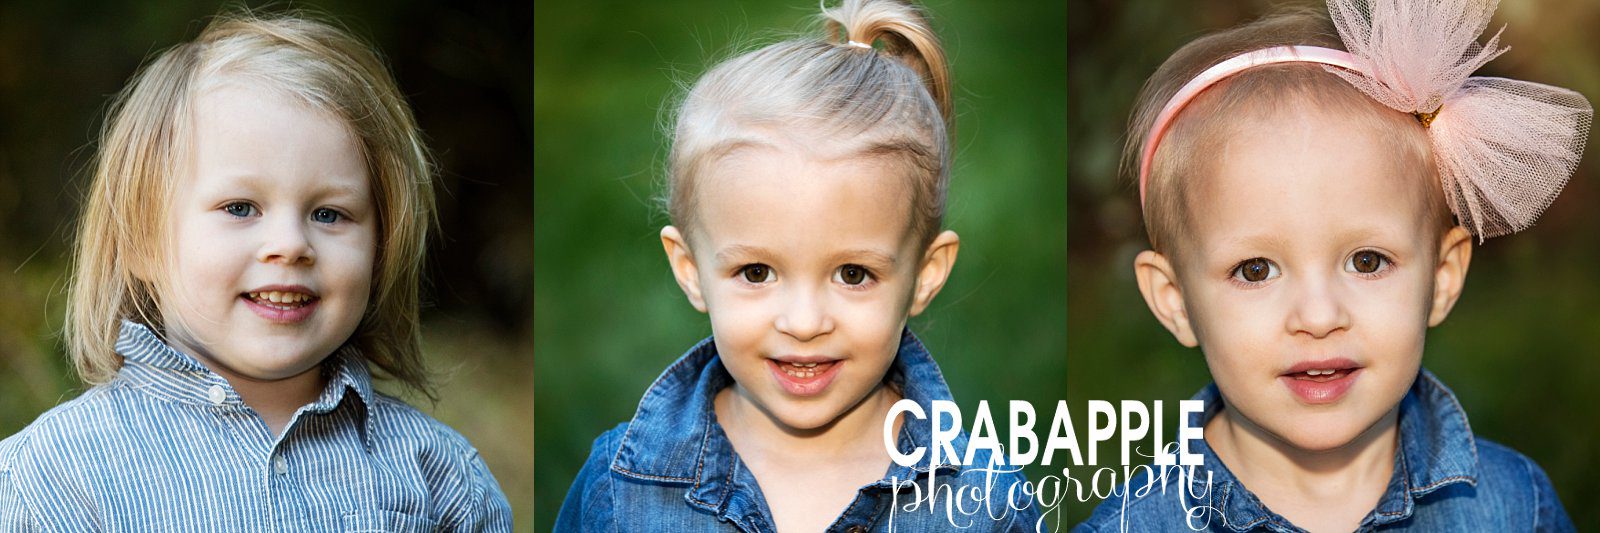 childrens photography andover ma